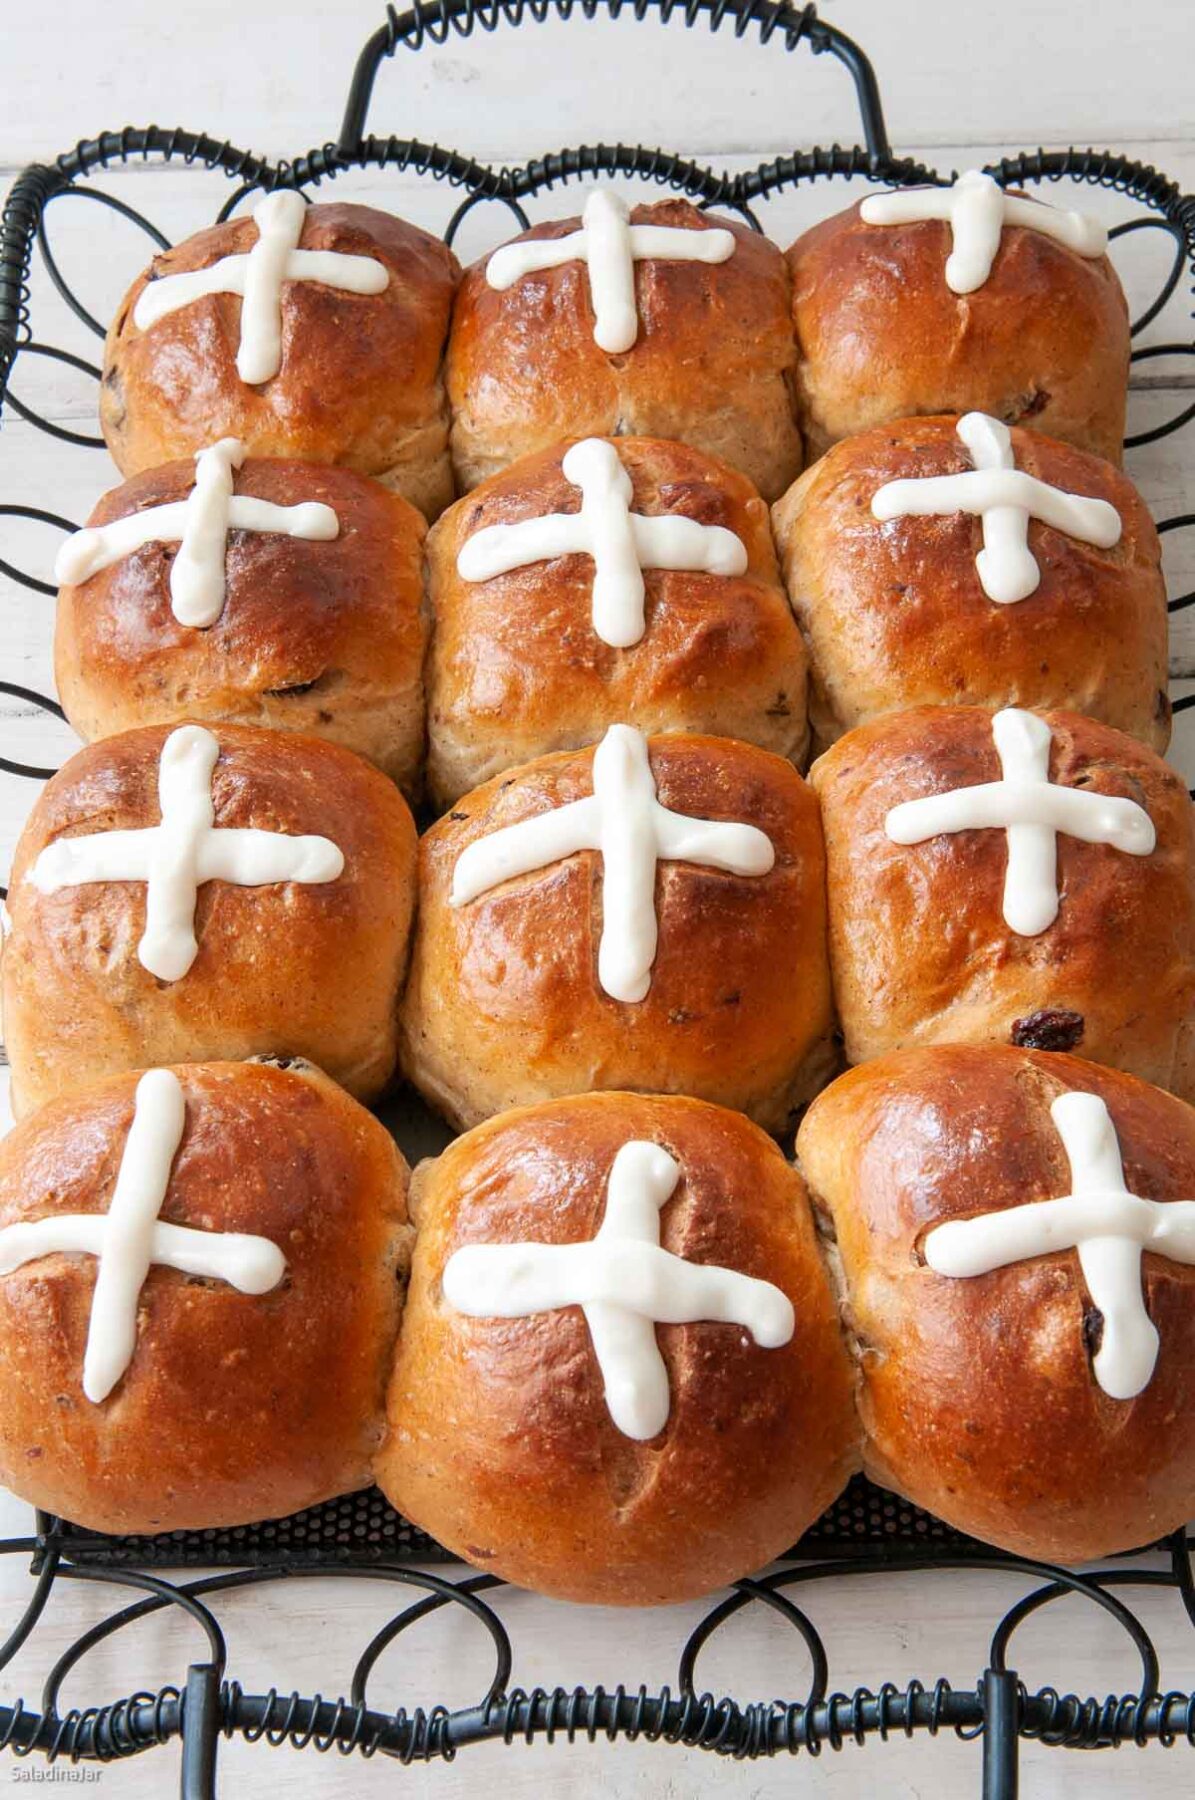 baked hot cross buns on a serving tray.